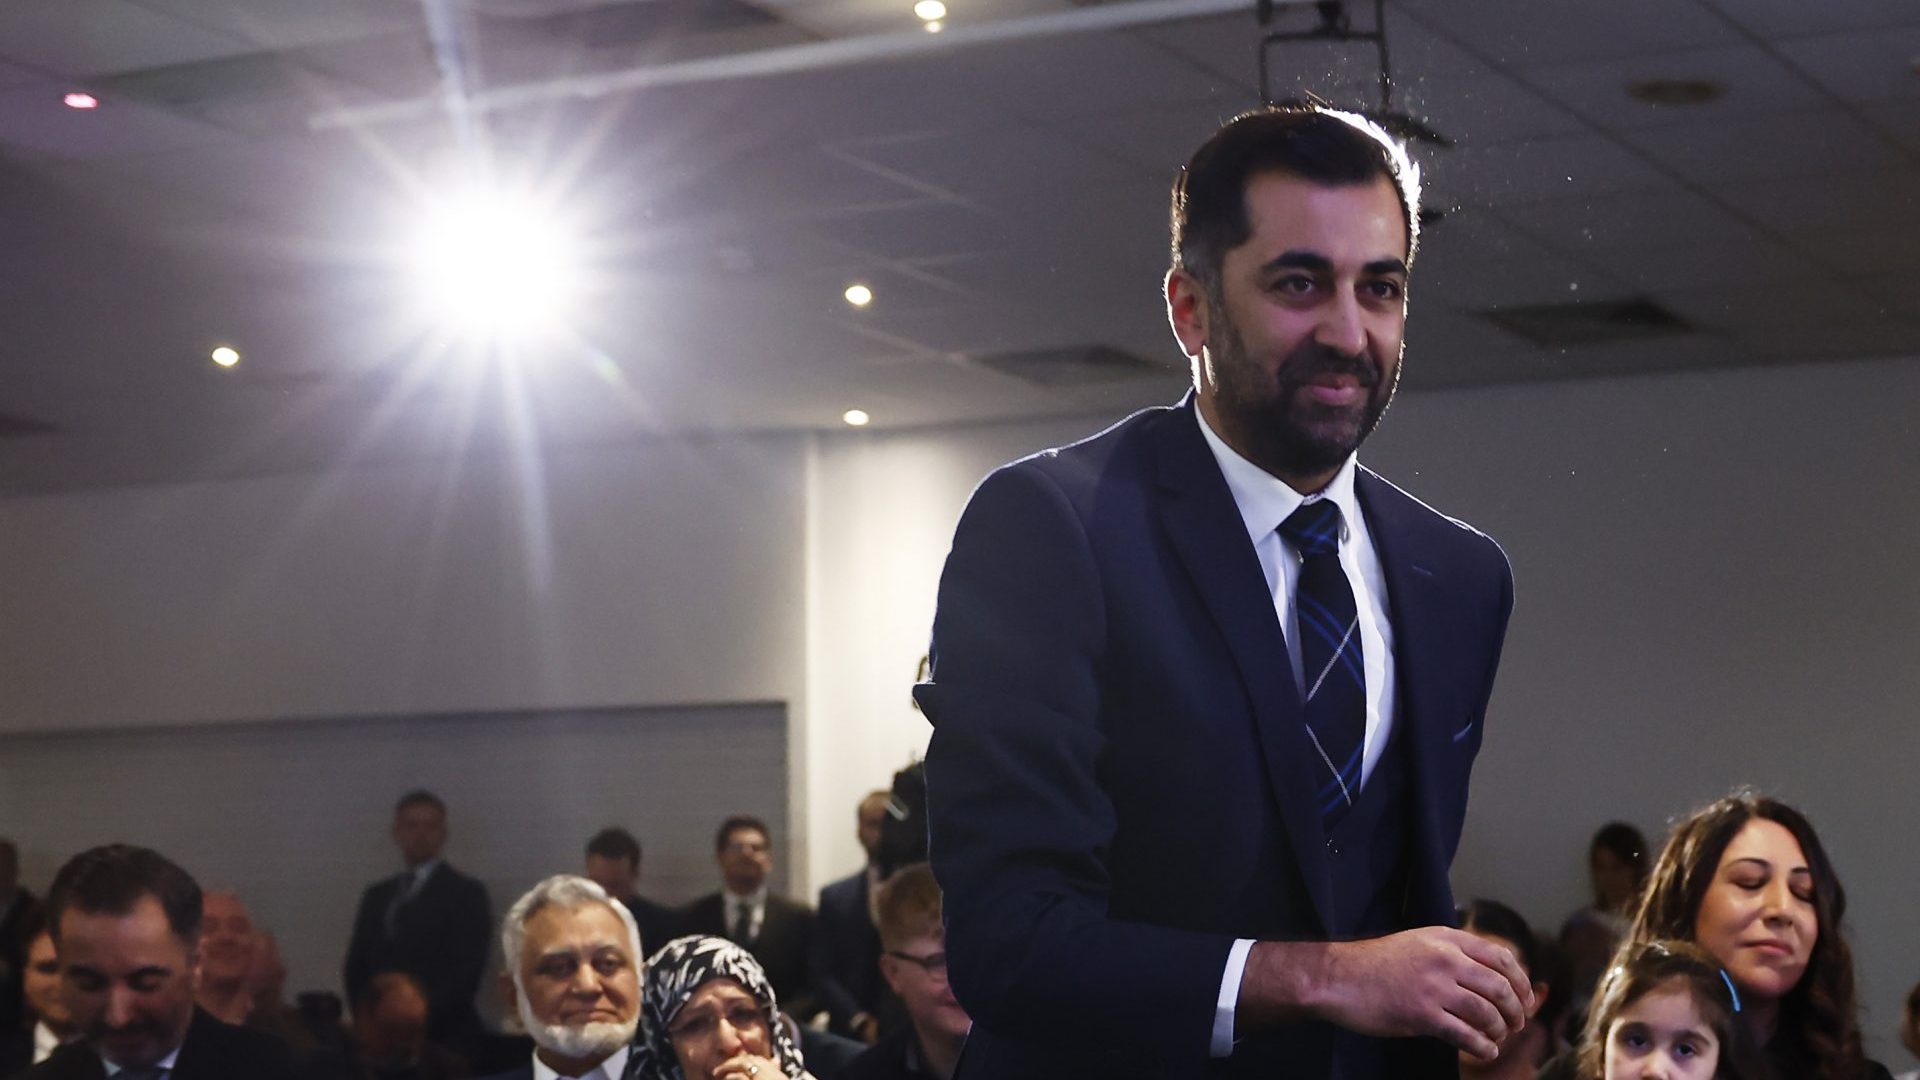 Scotland's health minister and SNP MSP Humza Yousaf walks to the stage to speak after being elected as new party leader (Photo by Jeff J Mitchell/Getty Images)